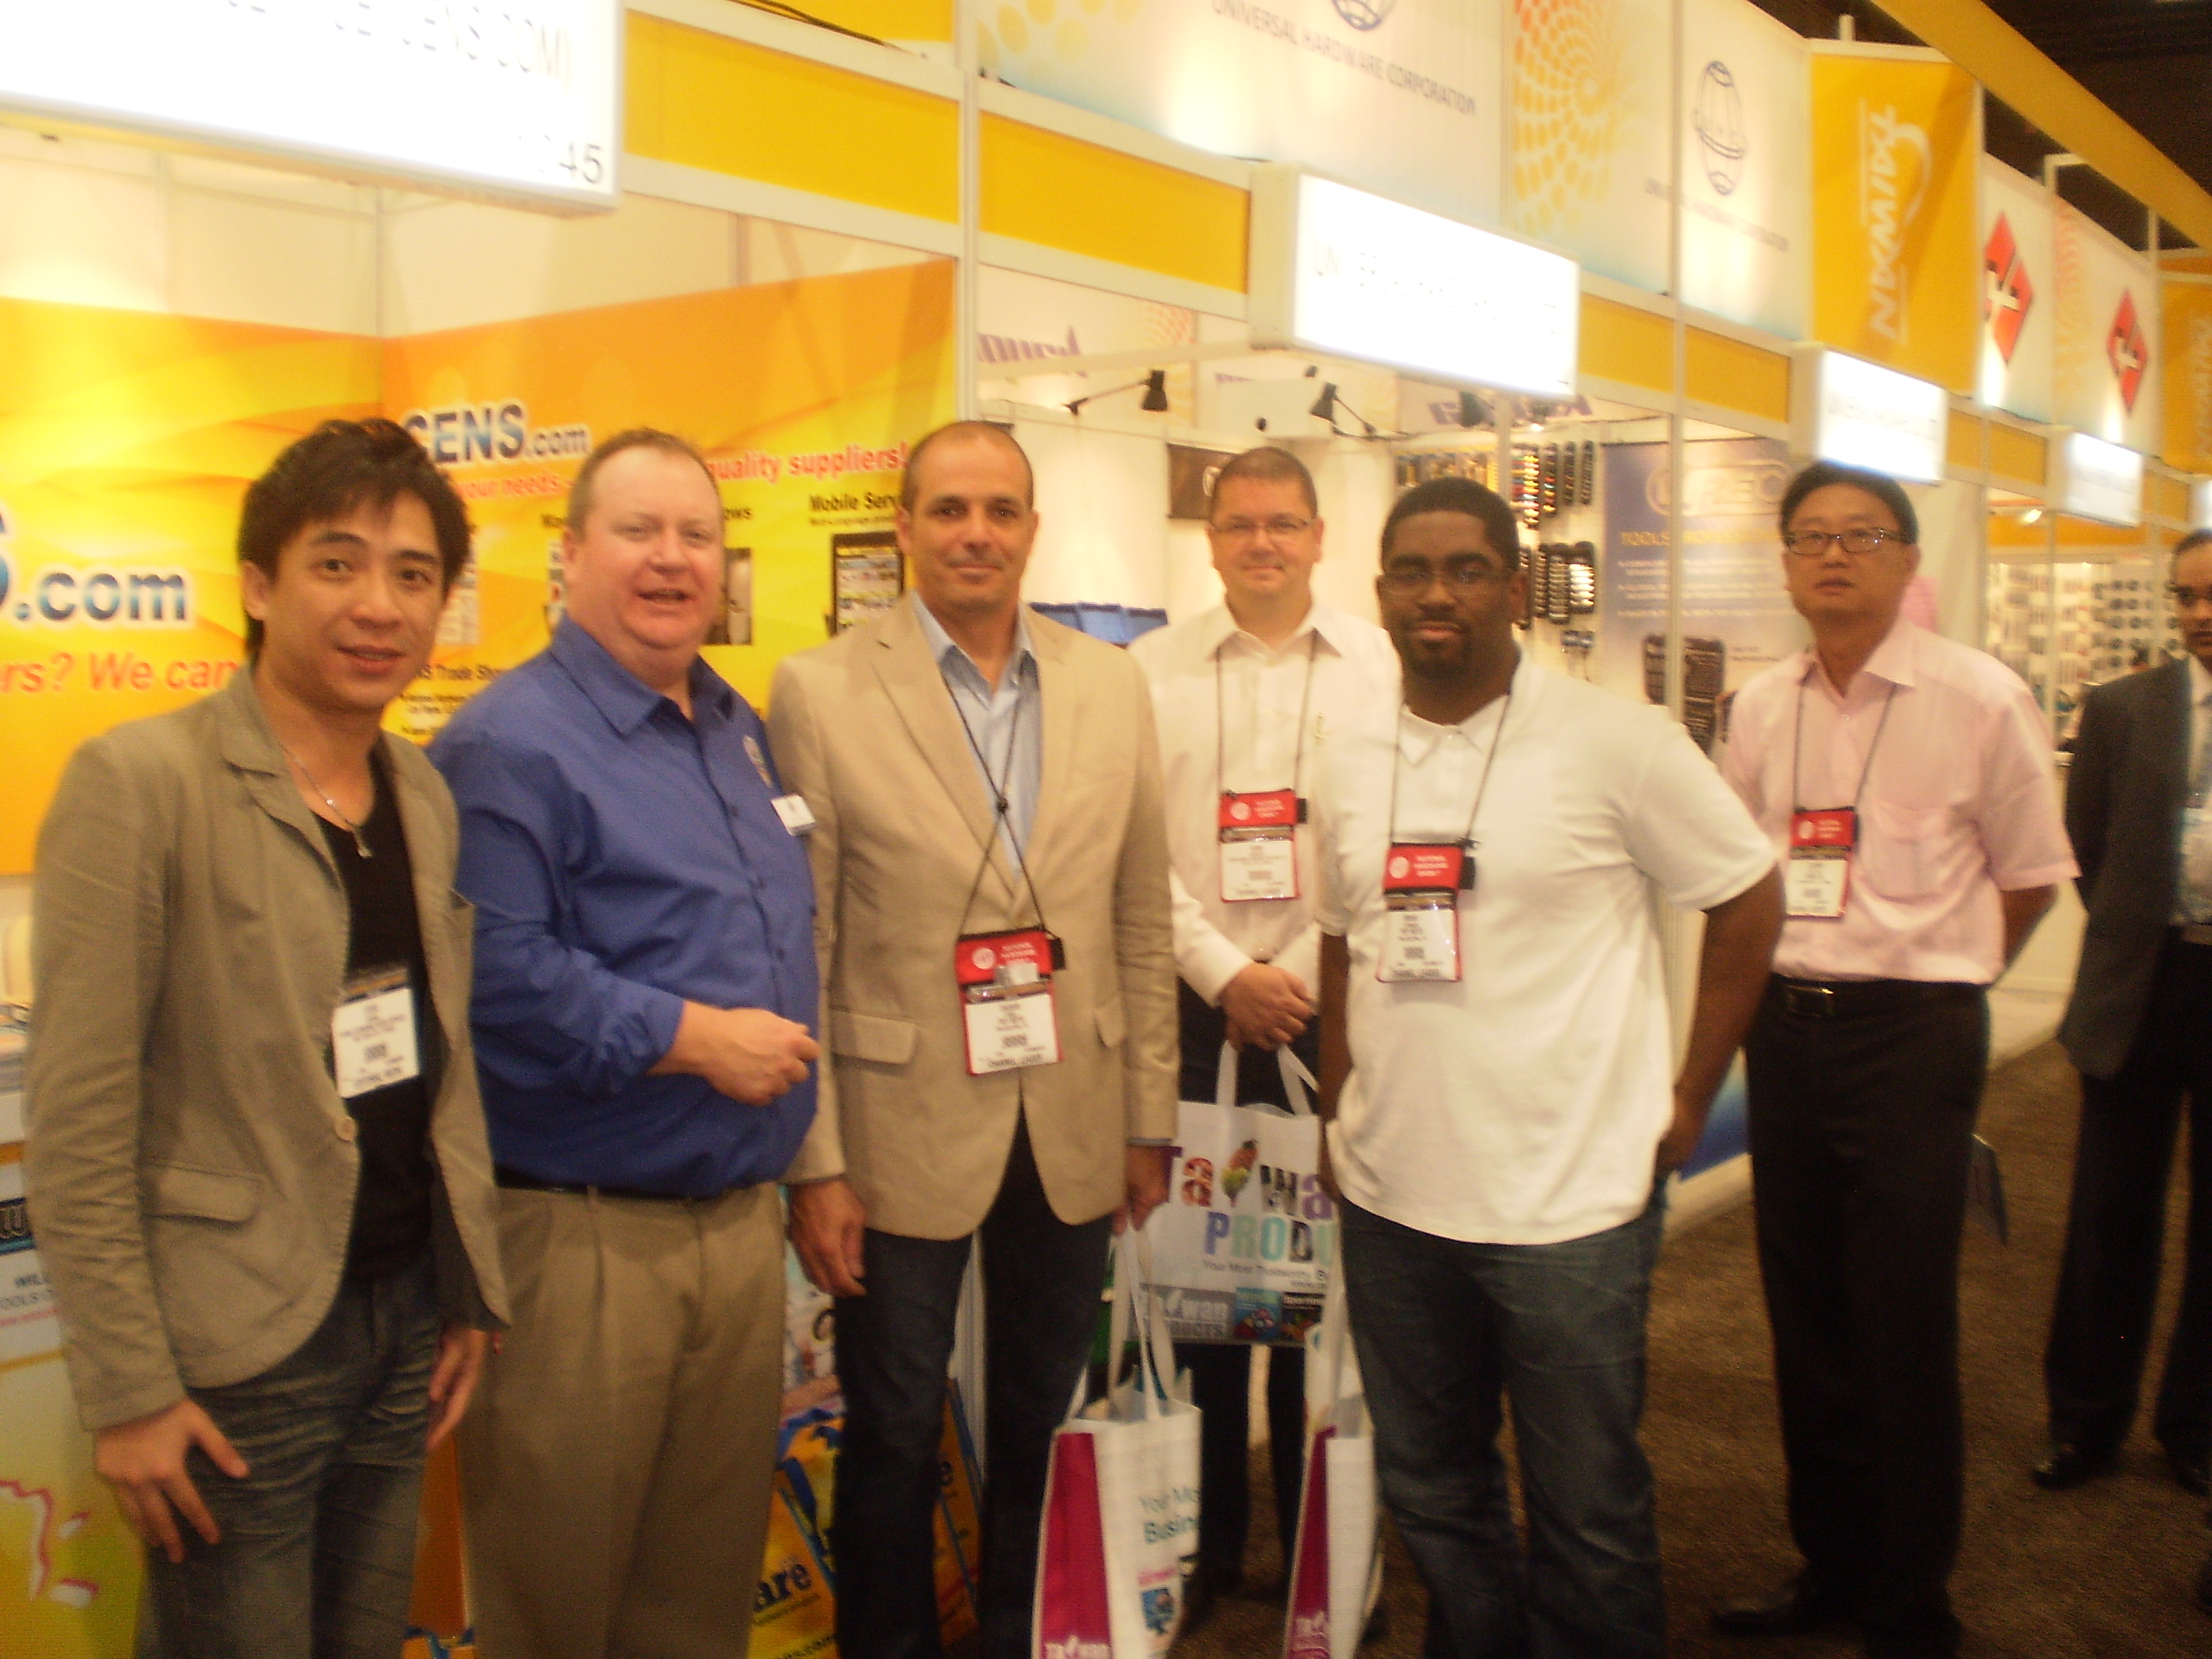 David Tobin (second from left), international sales director of Reed Exhibitions, brought some VIP buyers to CENS booth.